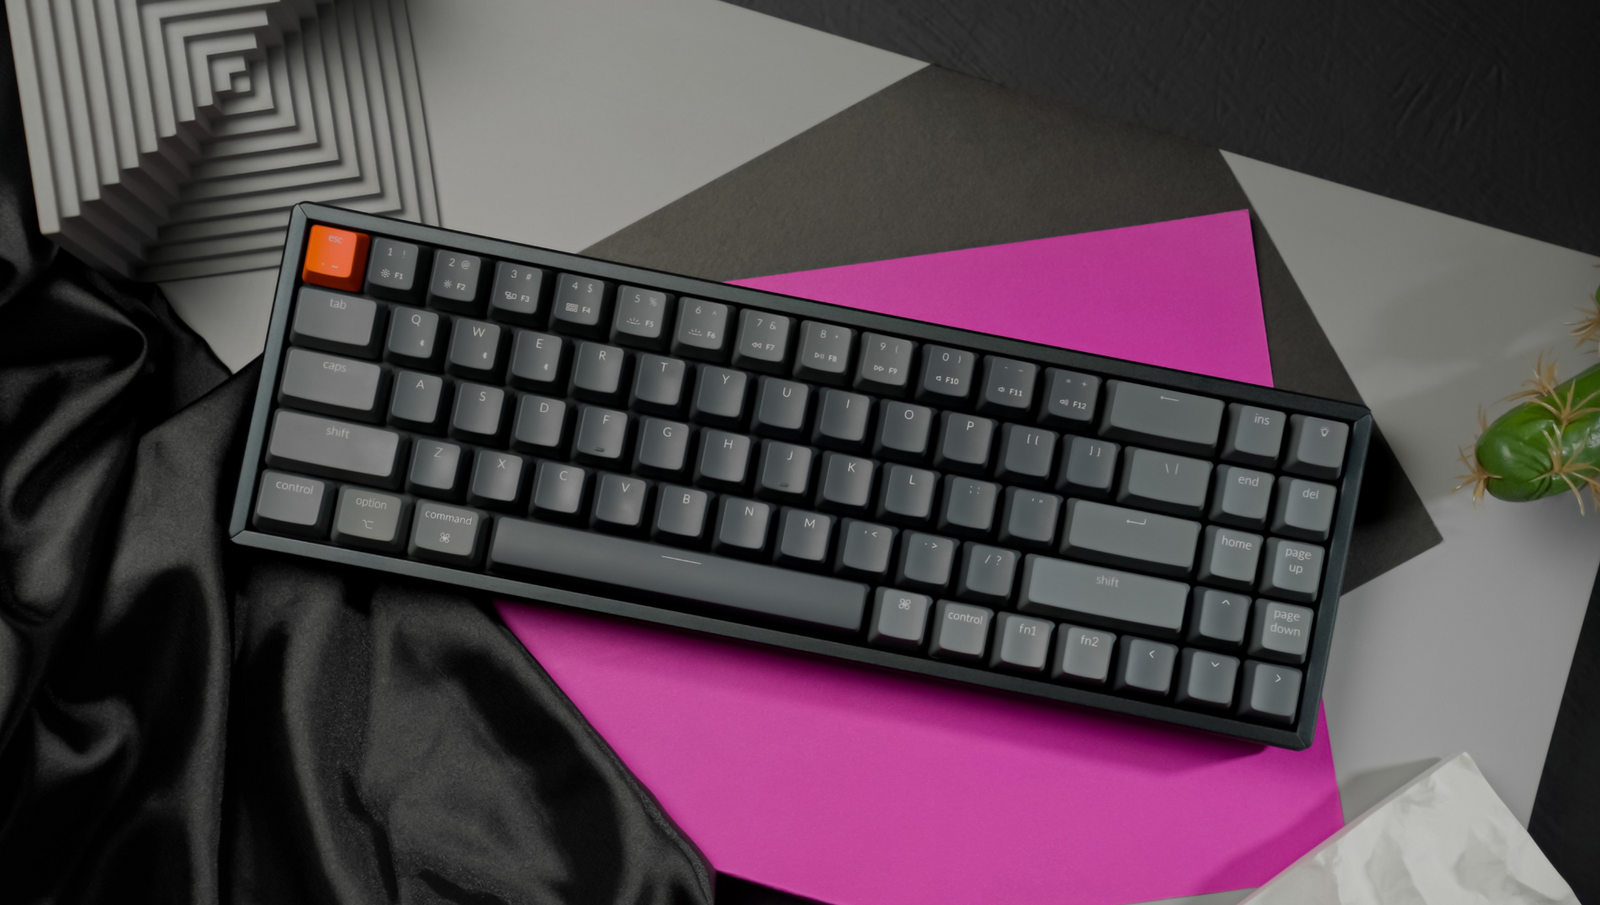 Keychron Keyboard Article Review - October 2021